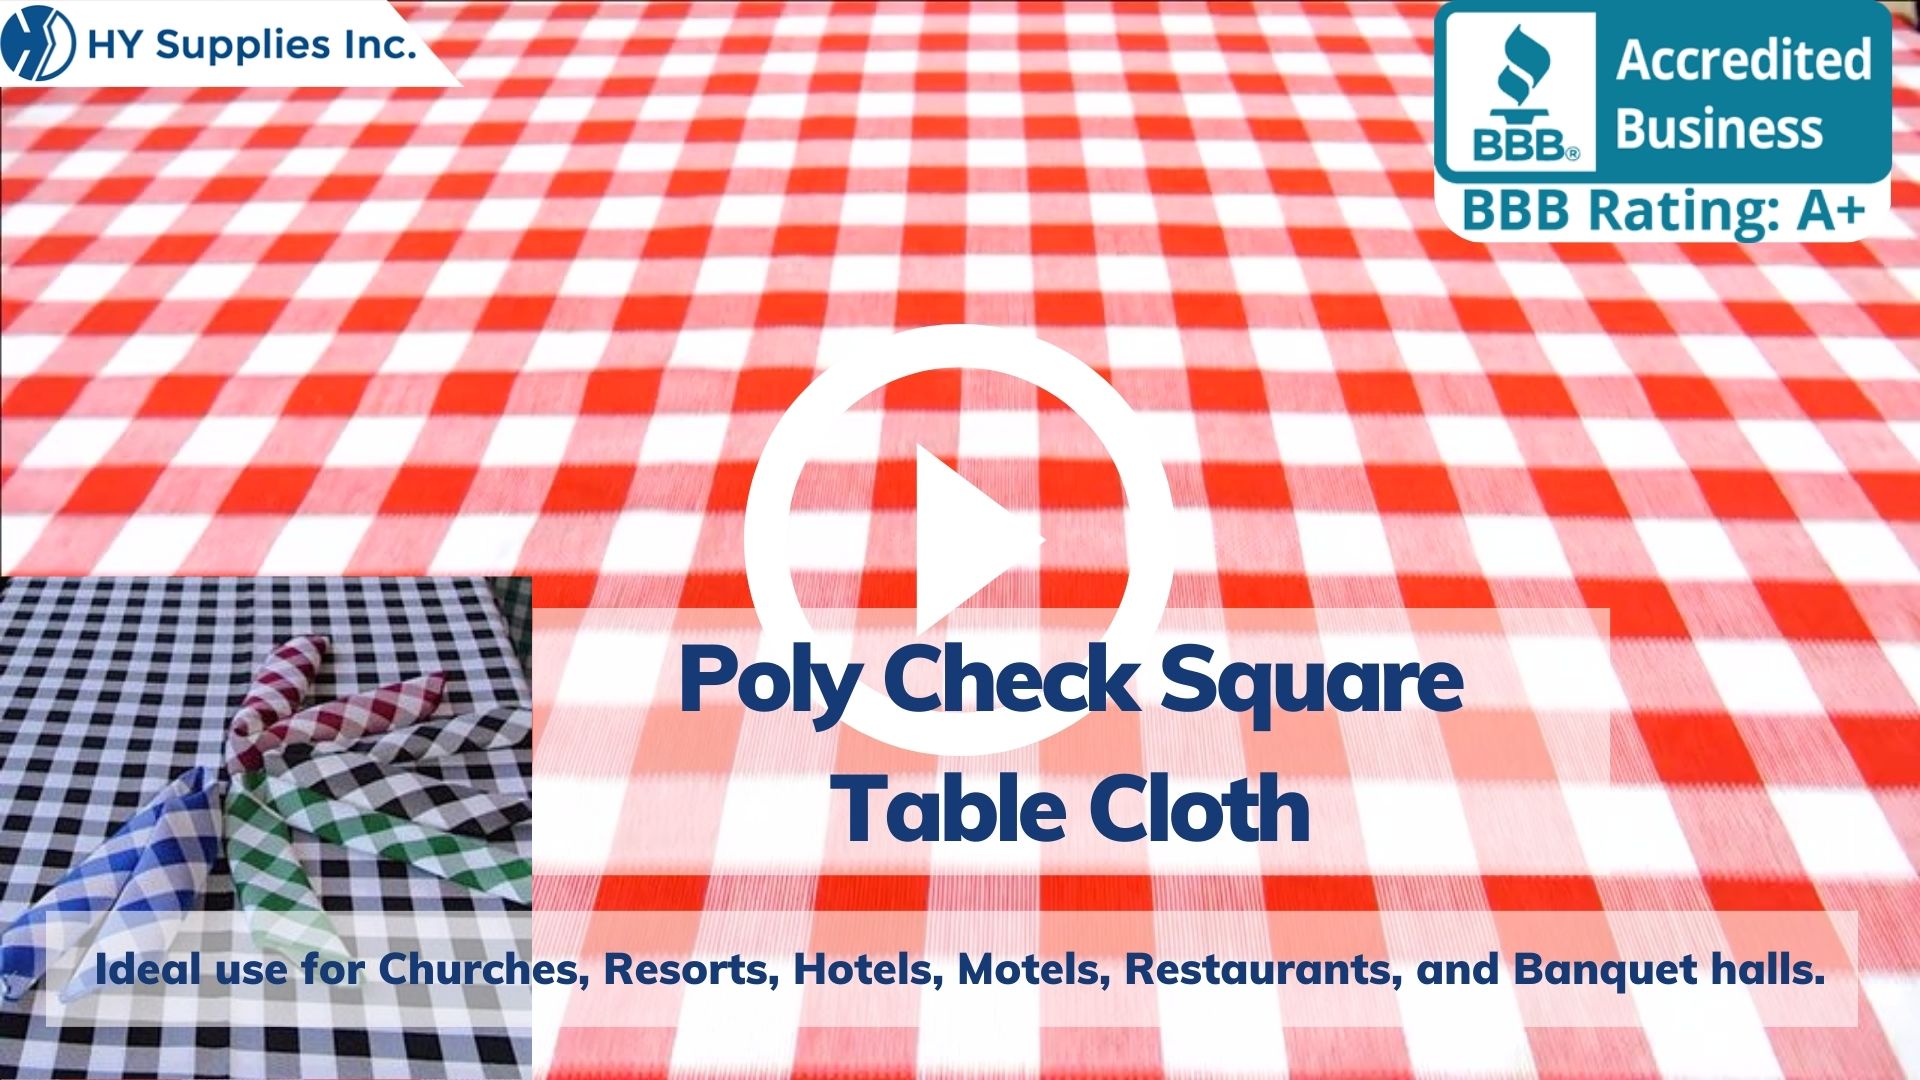 Poly Check Square Table Cloth